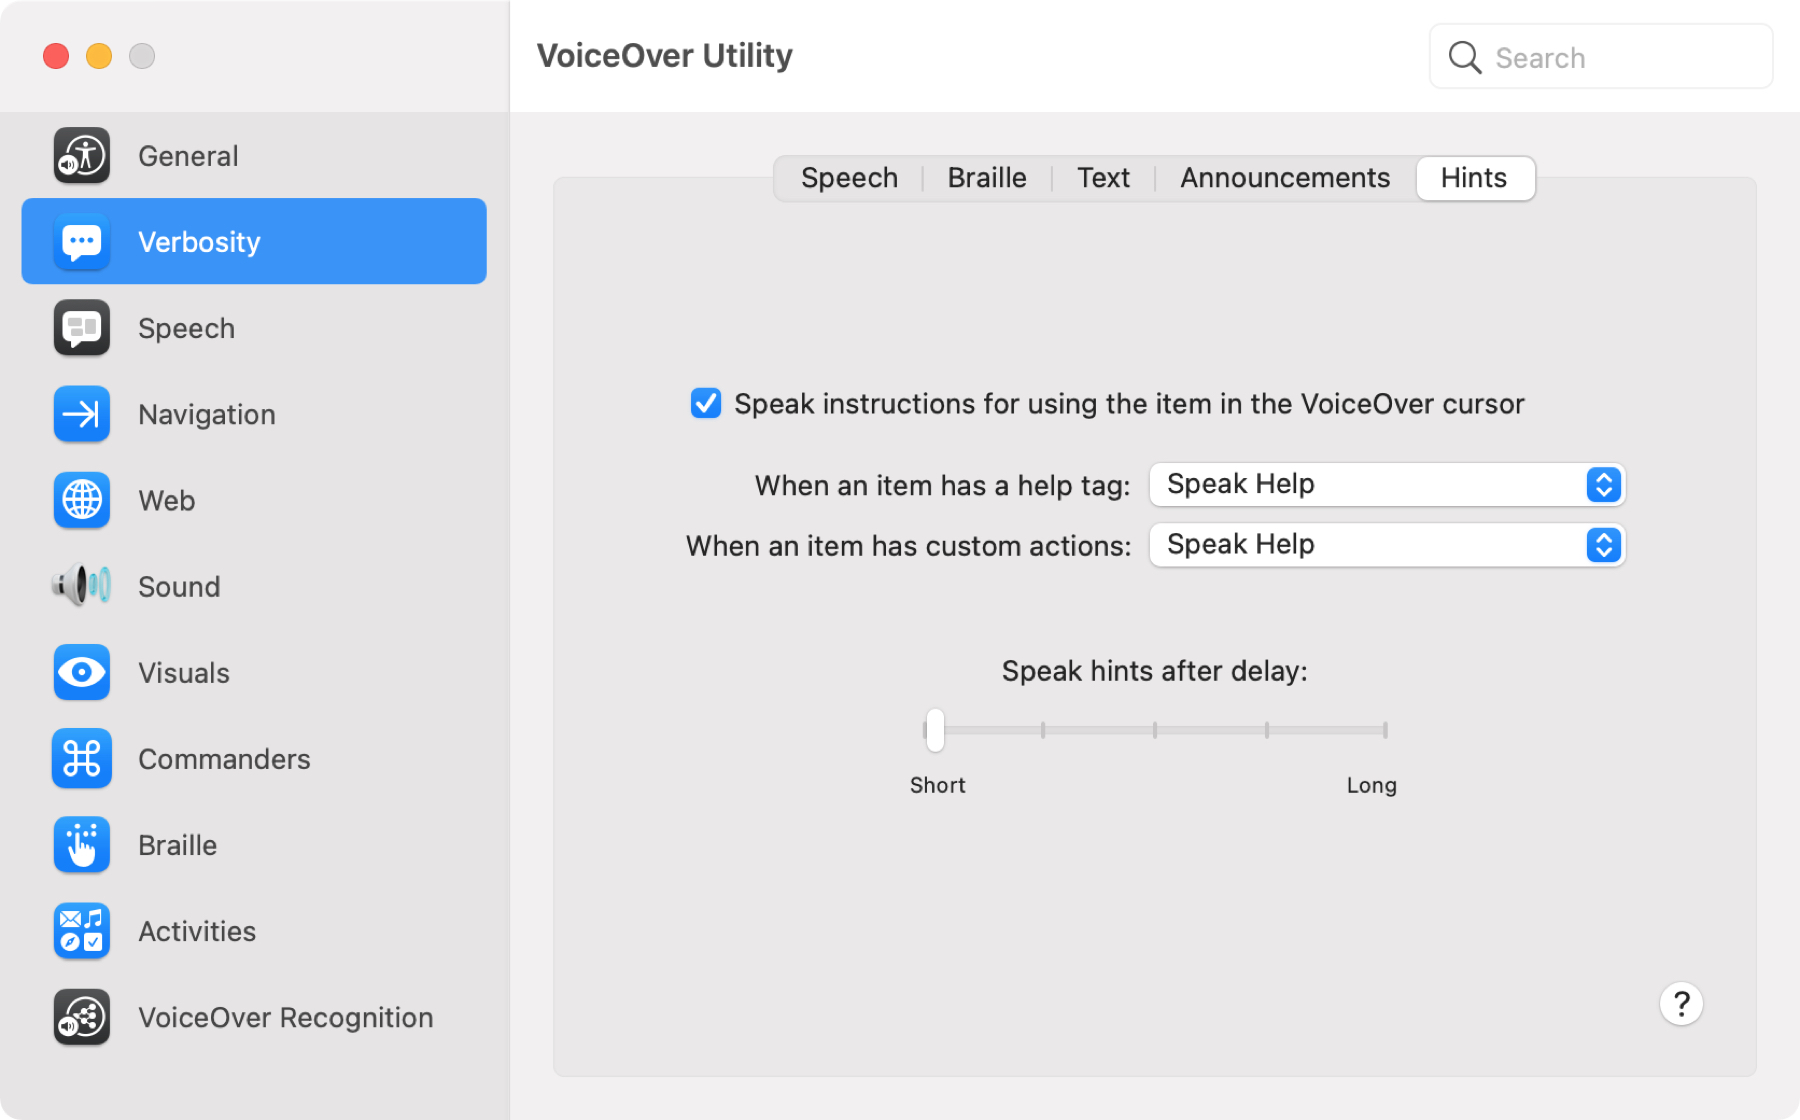 VoiceOver Utility Hints